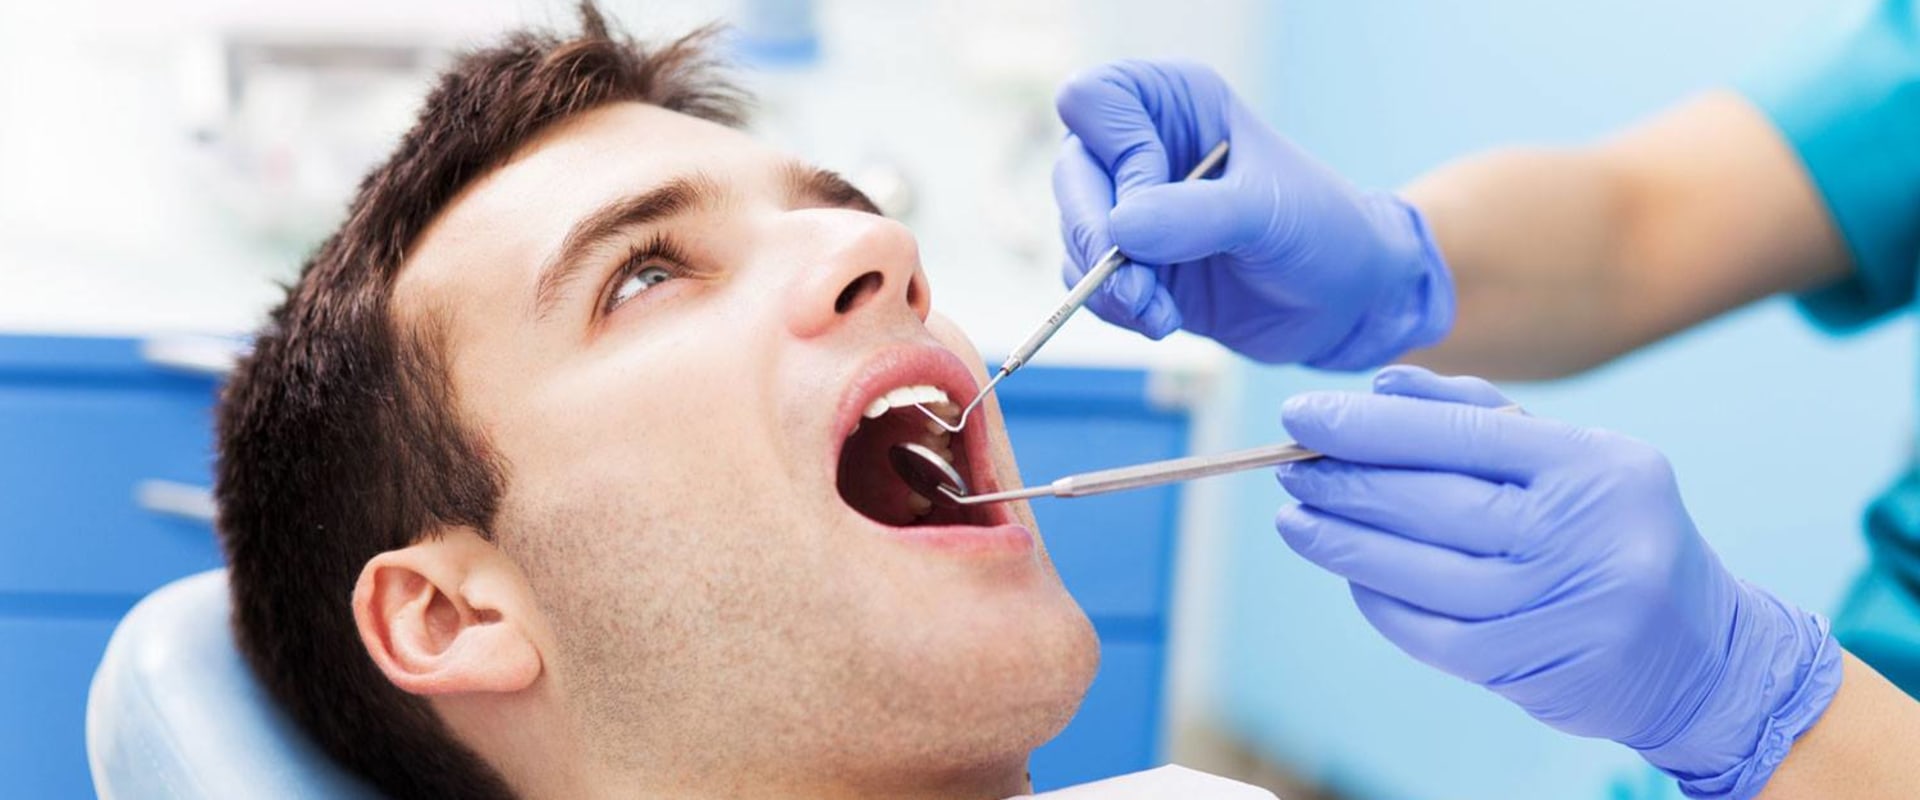 What is the Basic Dental Care